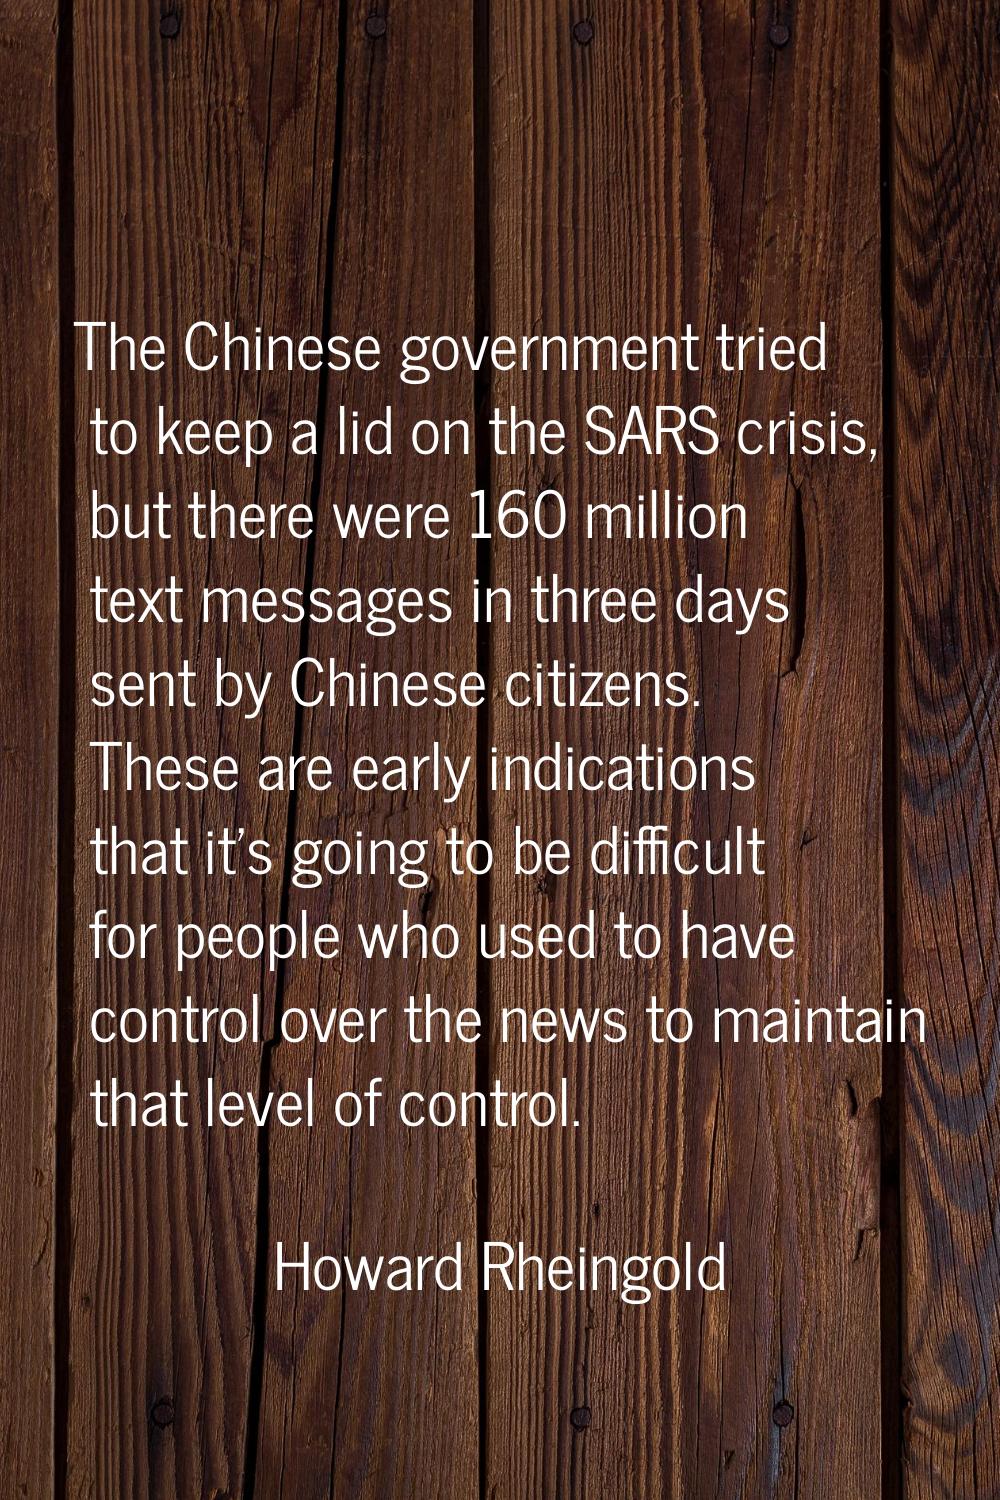 The Chinese government tried to keep a lid on the SARS crisis, but there were 160 million text mess